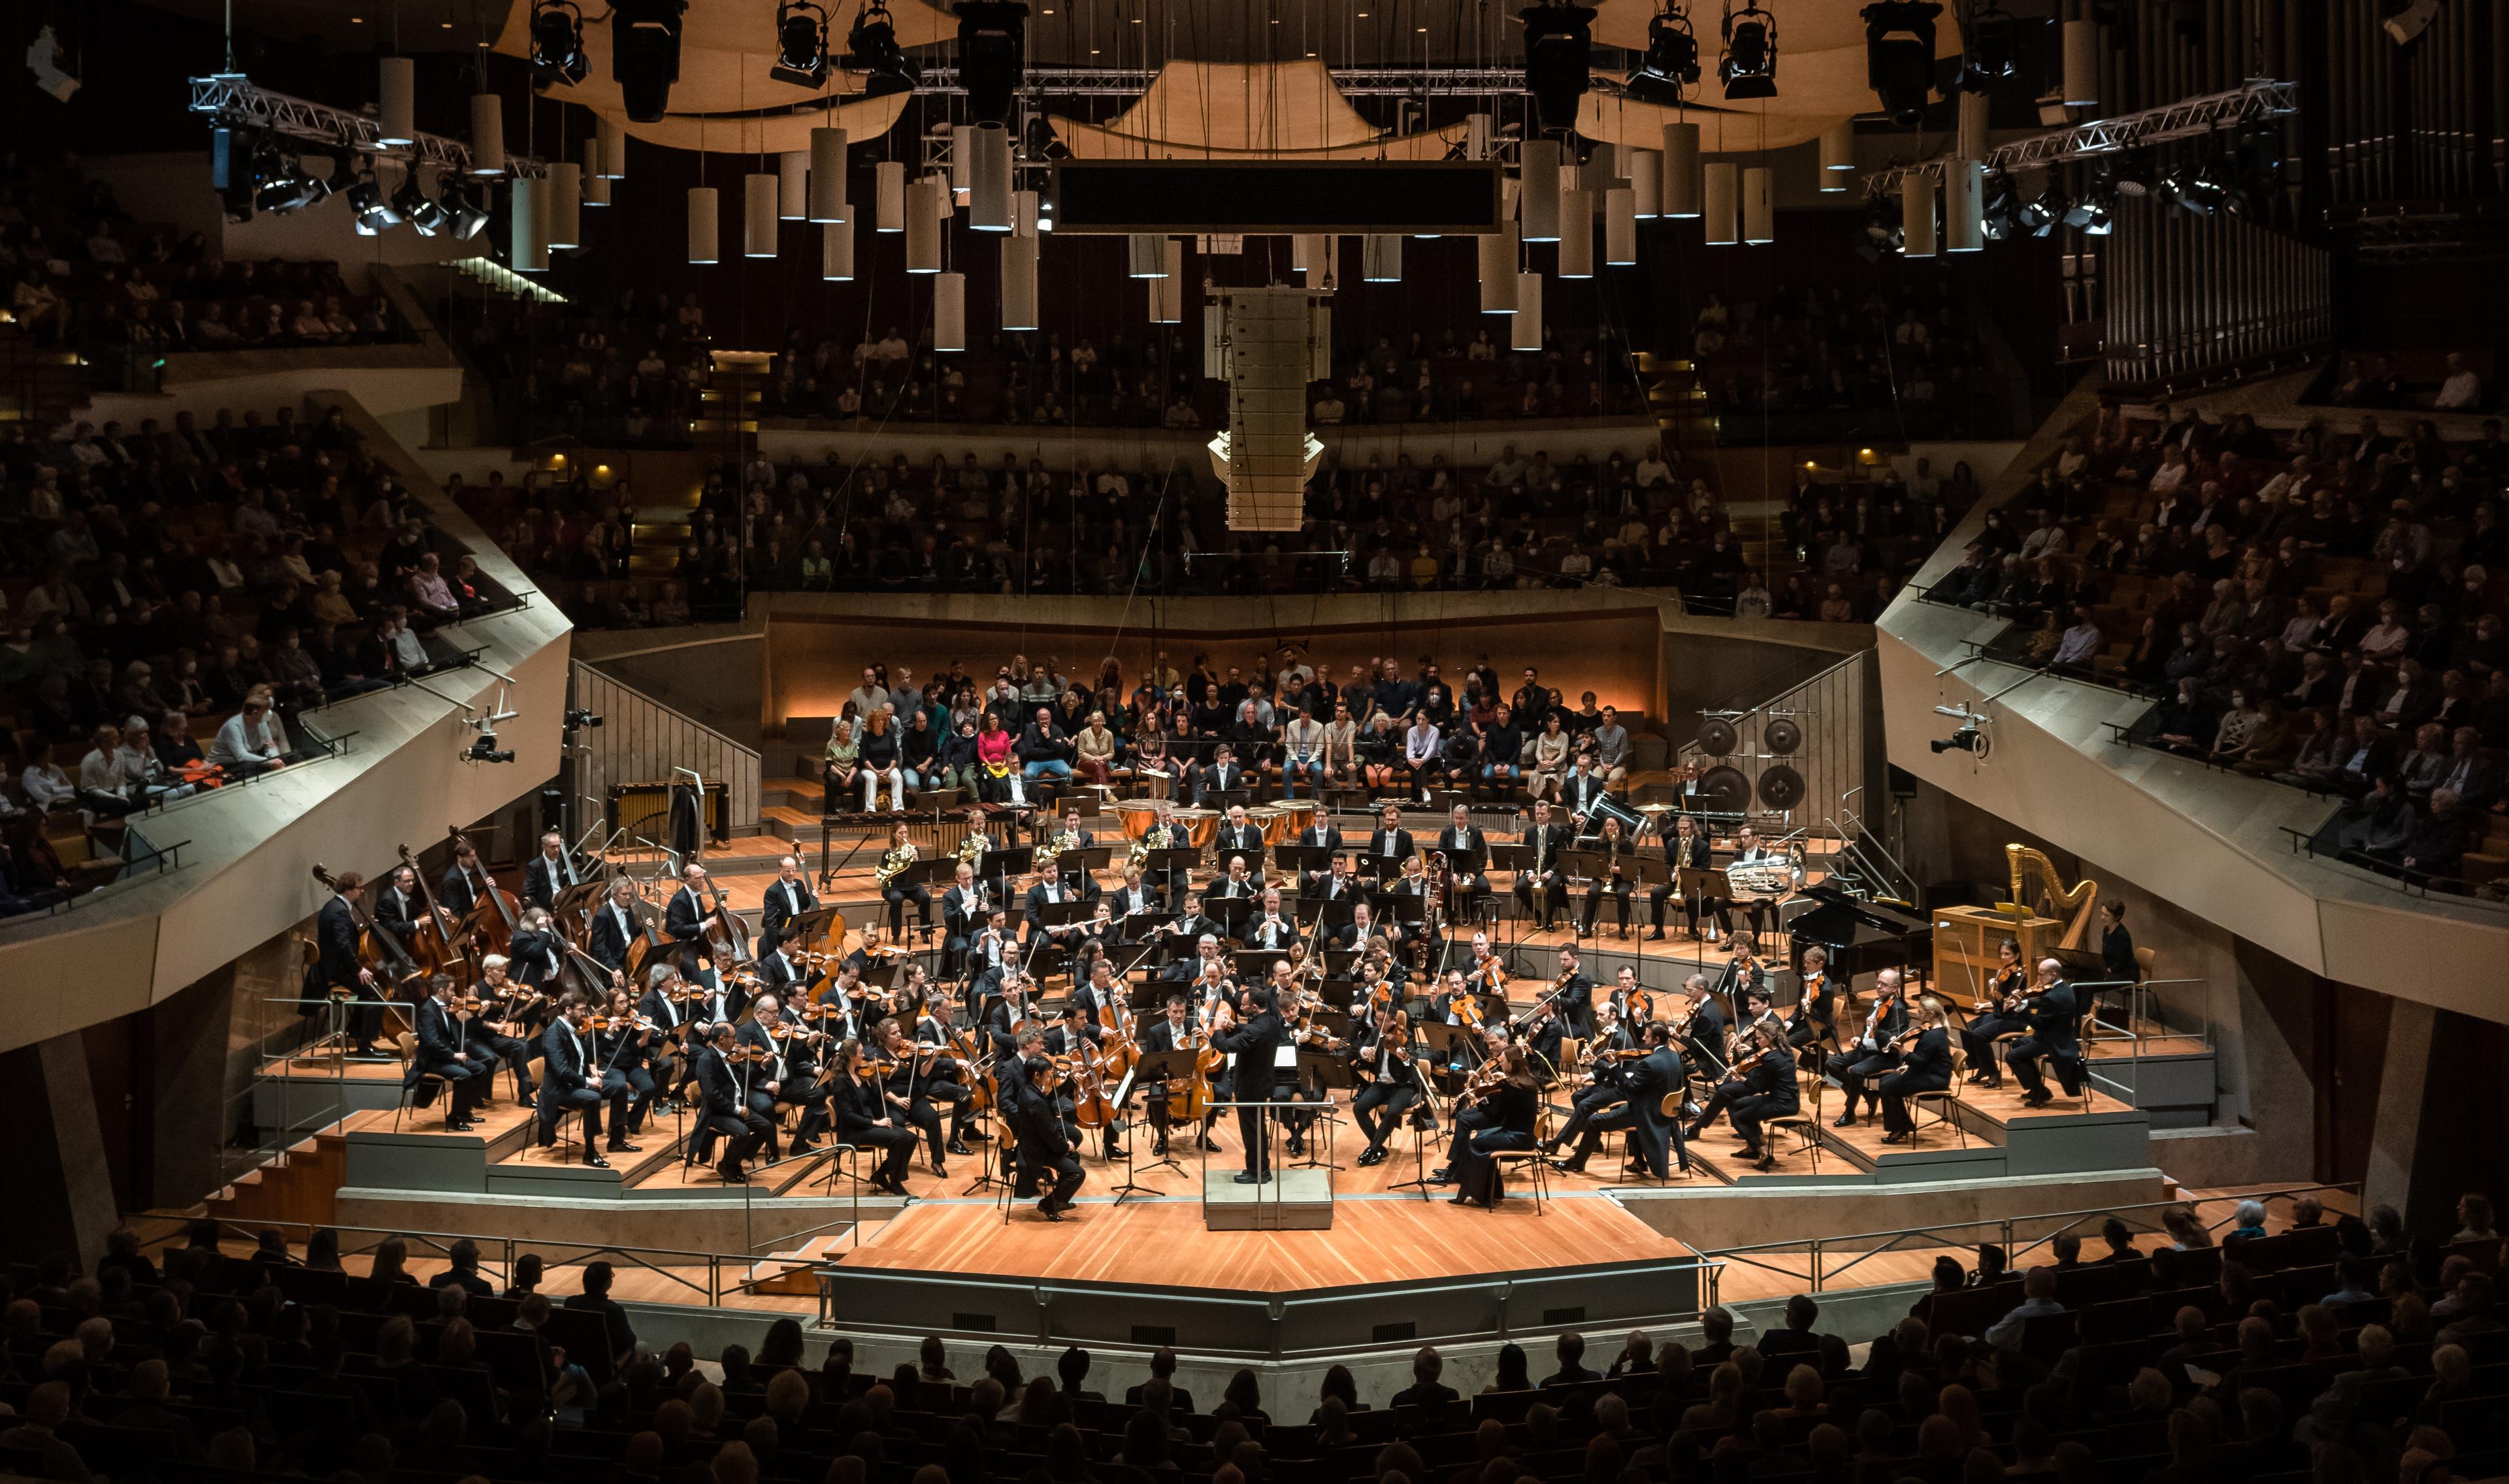 Musicians of the orchestra on stage at the Philharmonie